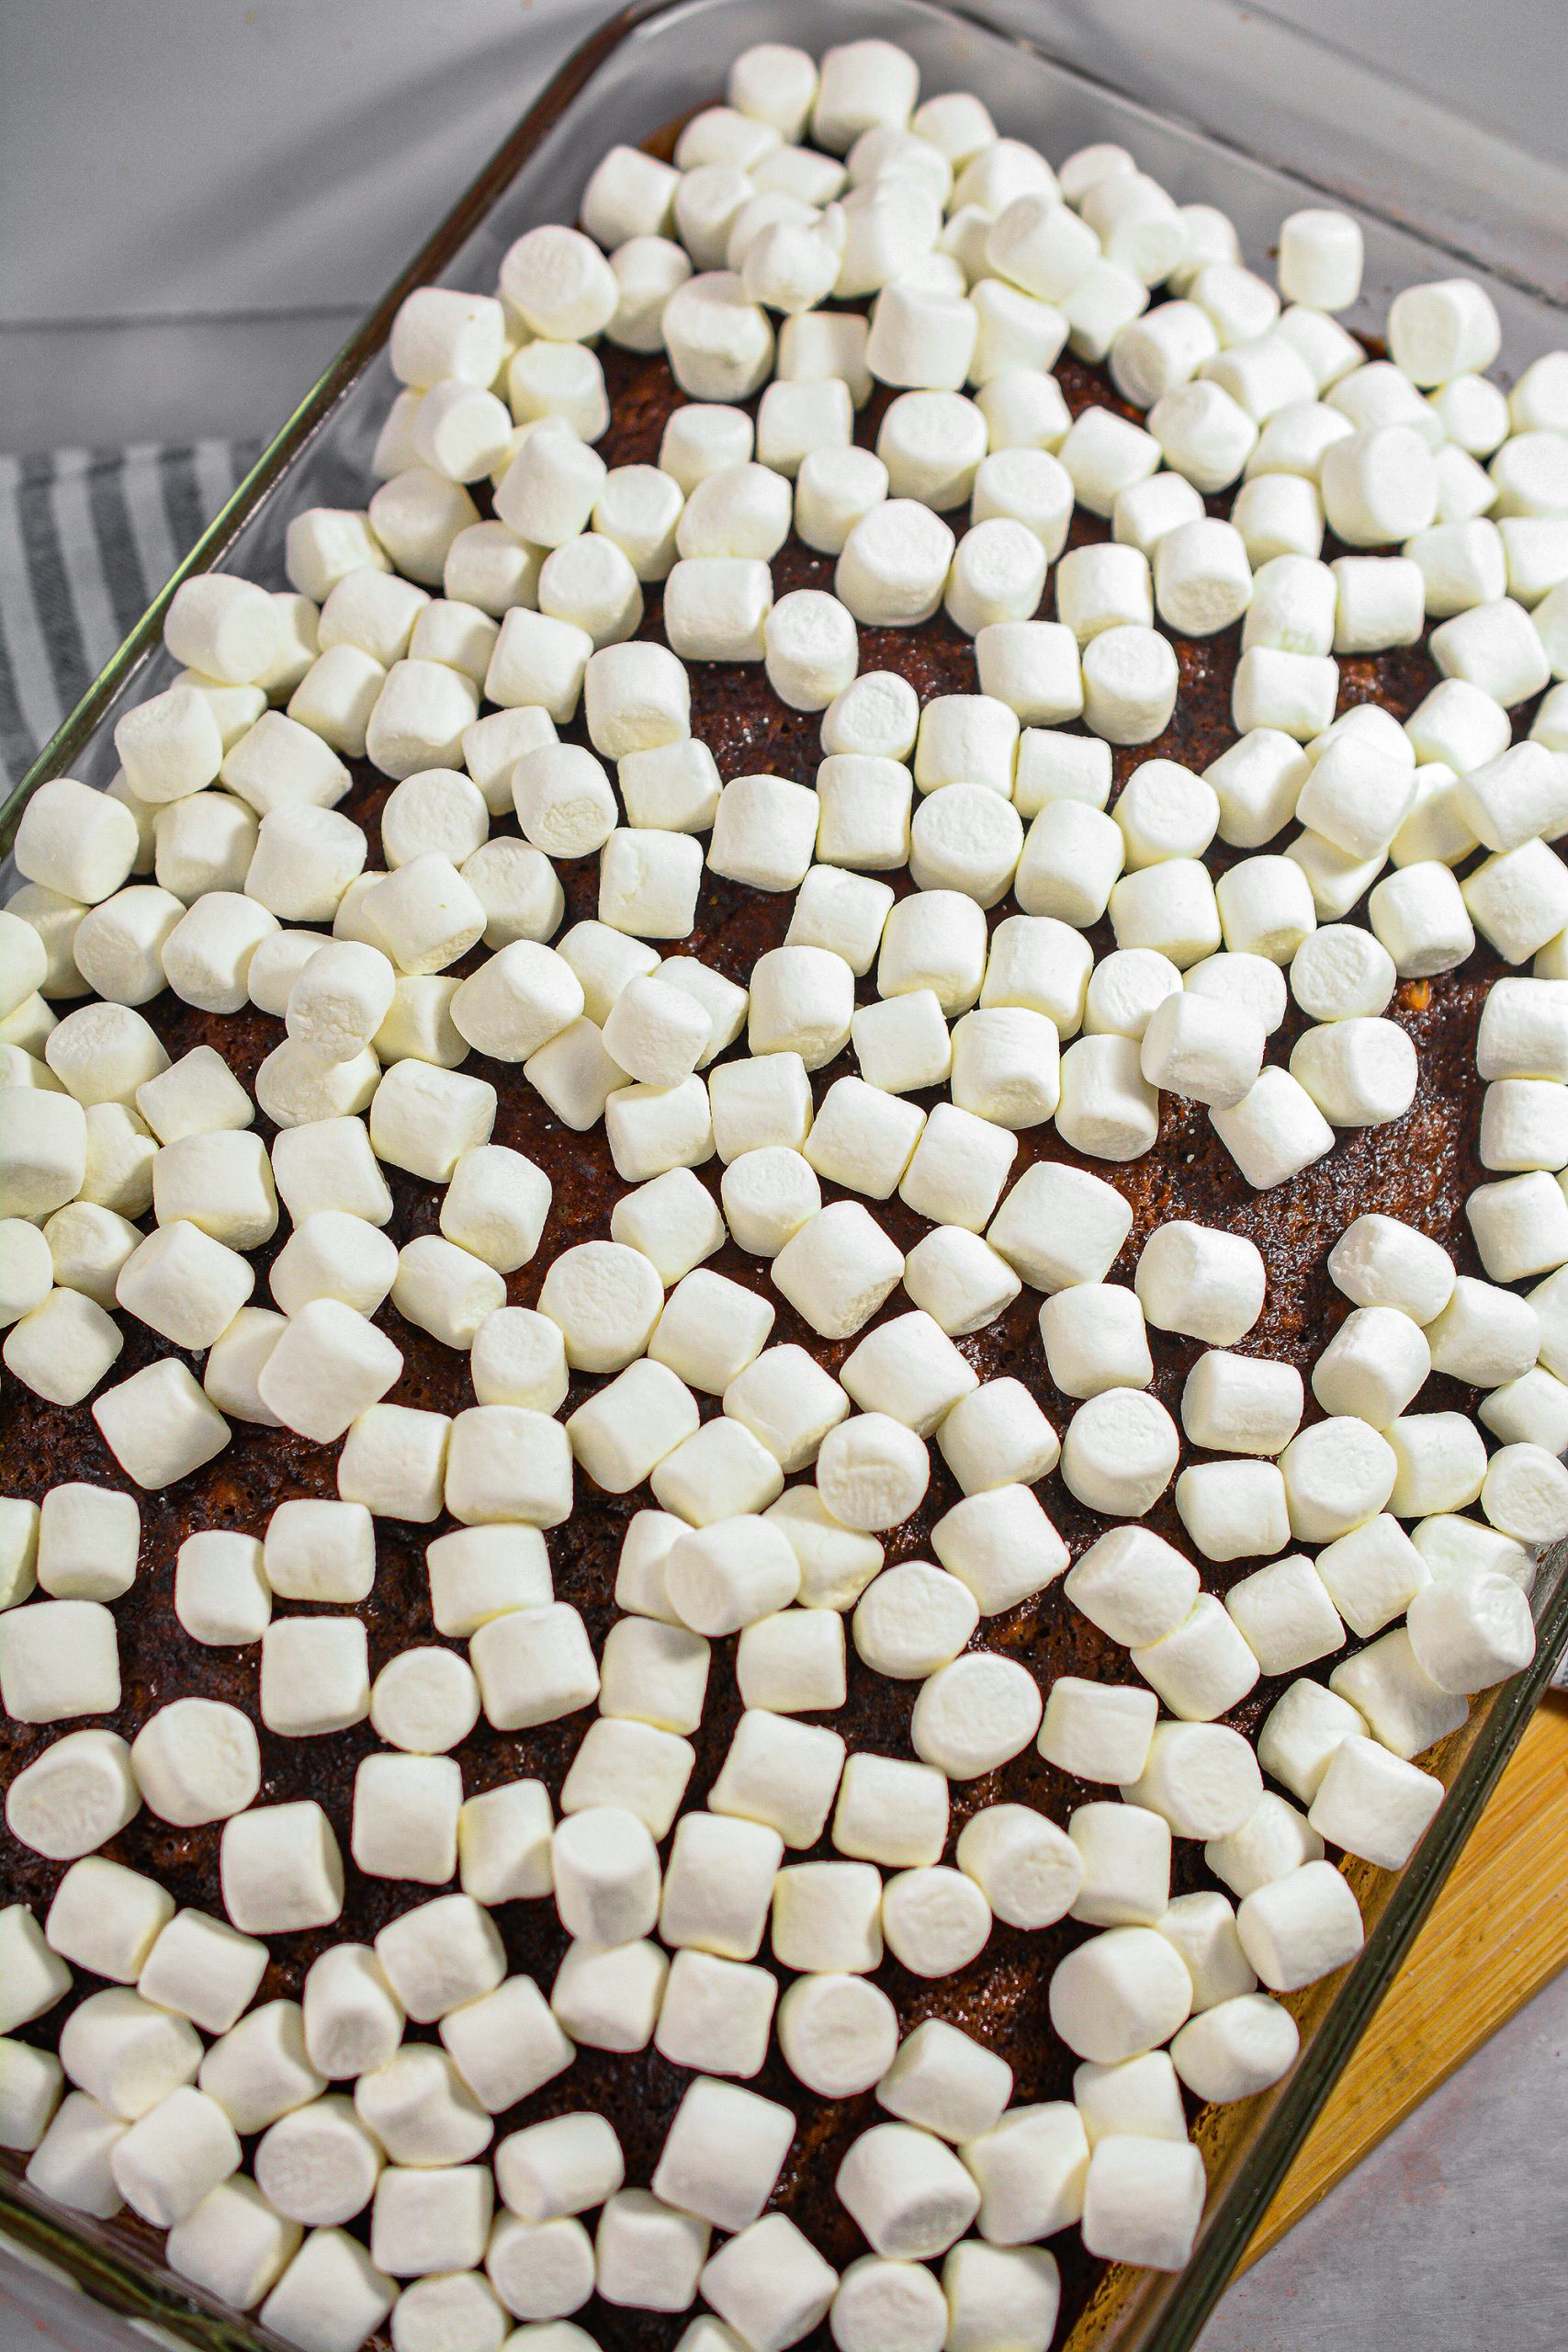 Spread the mini marshmallows over the cooled cake.